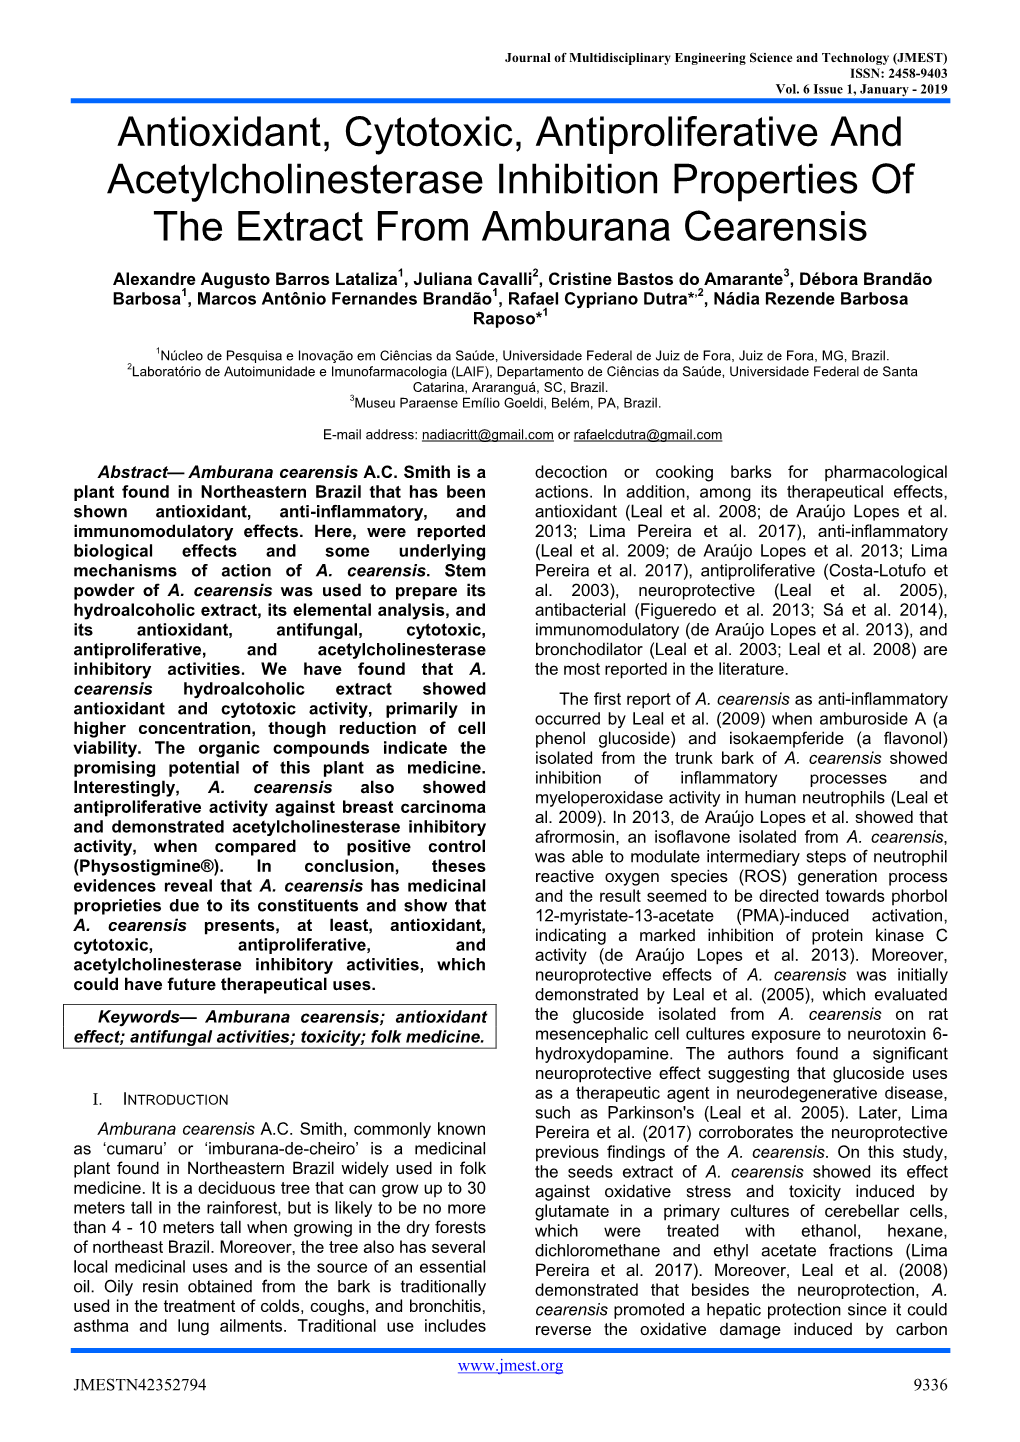 Antioxidant, Cytotoxic, Antiproliferative and Acetylcholinesterase Inhibition Properties of the Extract from Amburana Cearensis